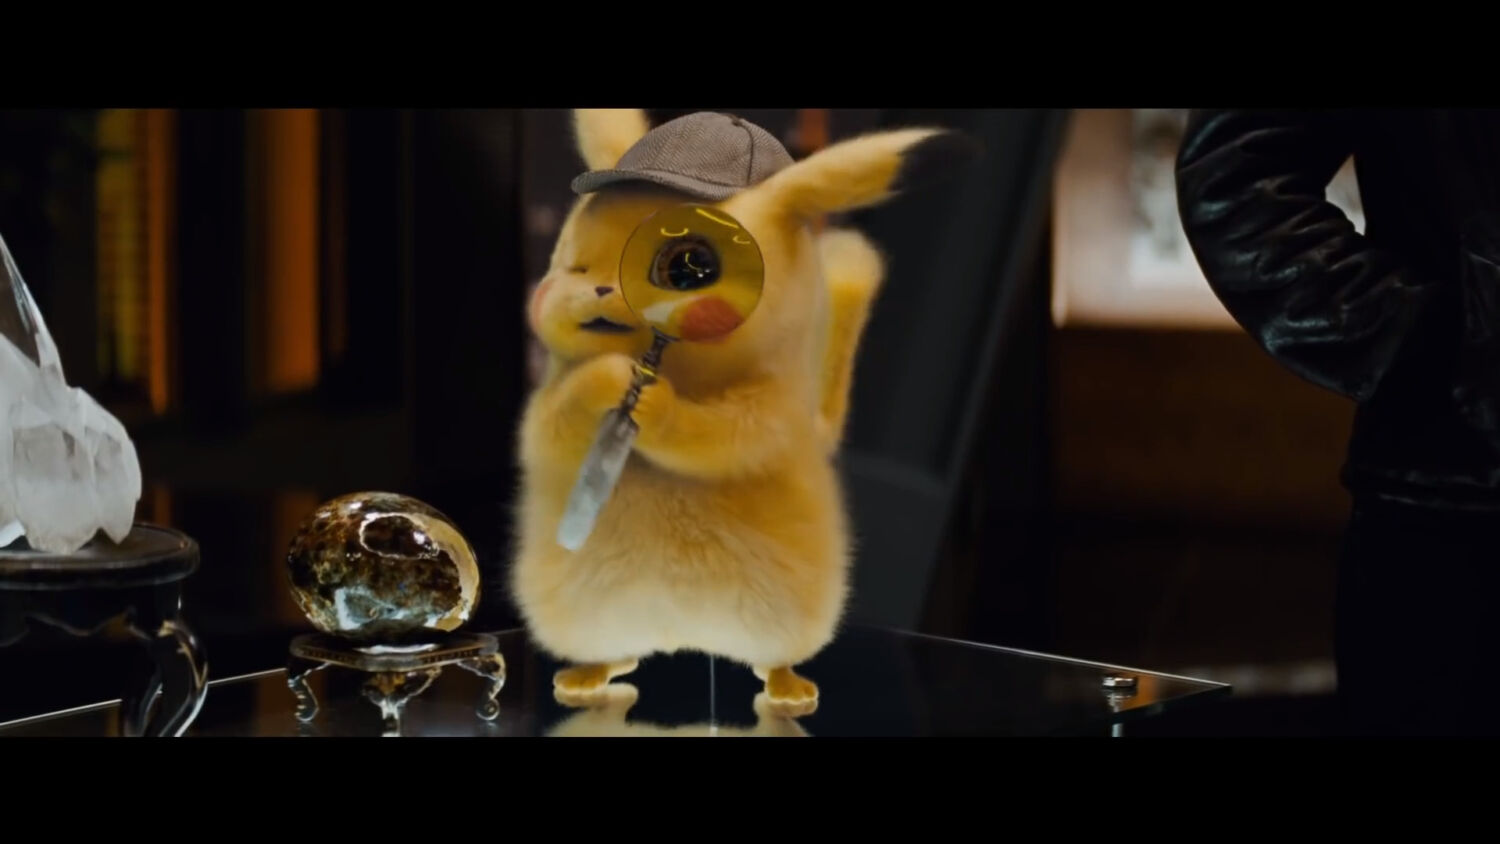 Detective Pikachu: Every Pokemon Appearing in the New Movie - IGN